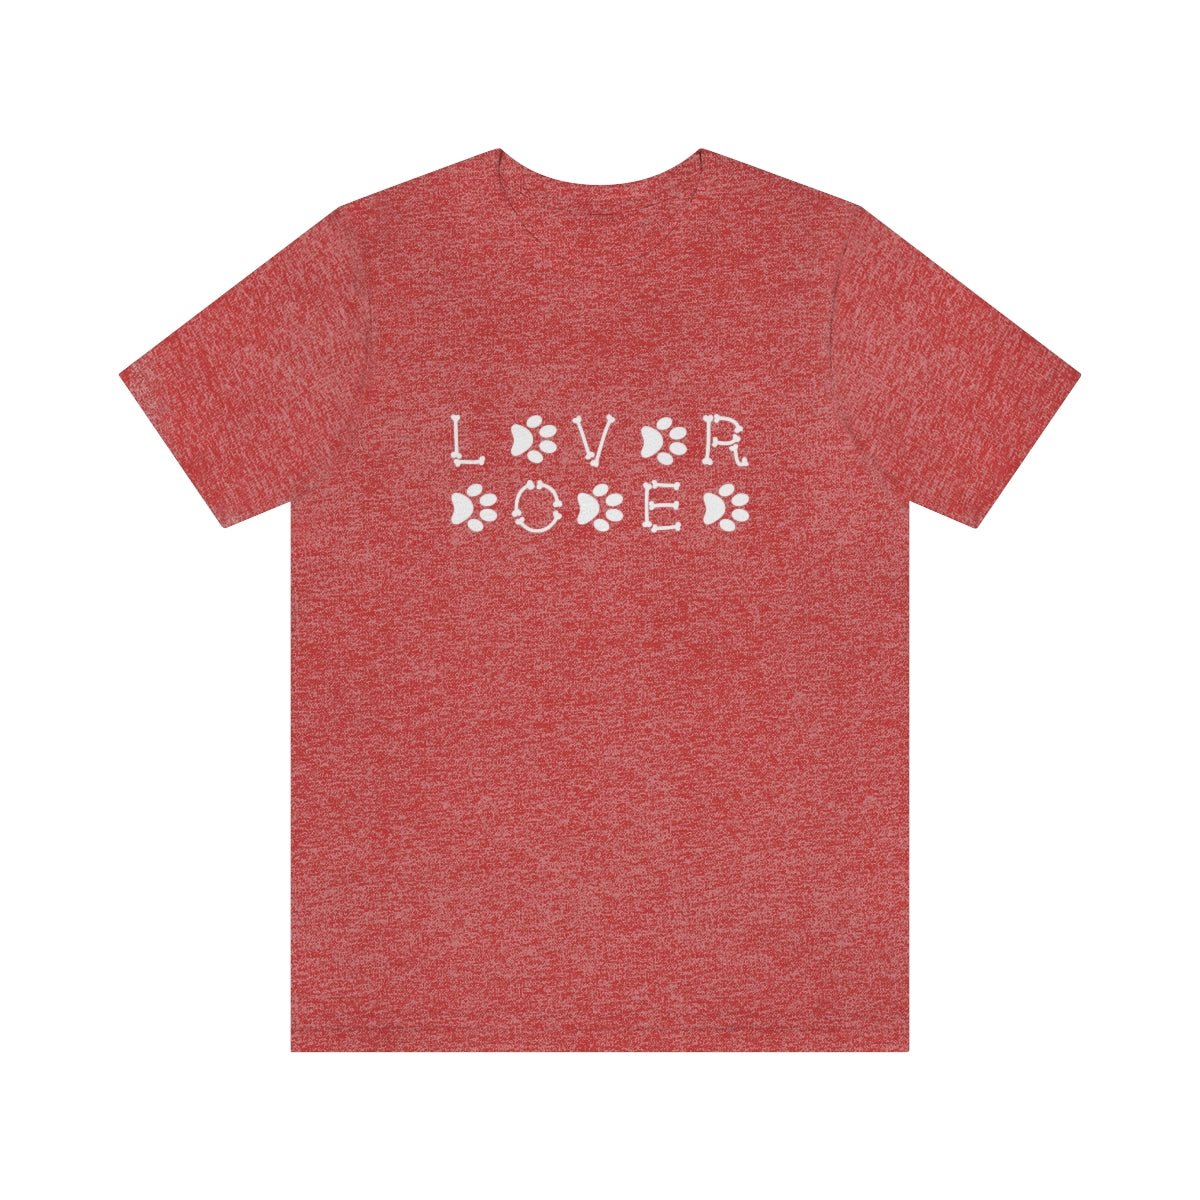 Dog Lover Men's Heathered Red Jersey Short Sleeve Tee - ZumBuys